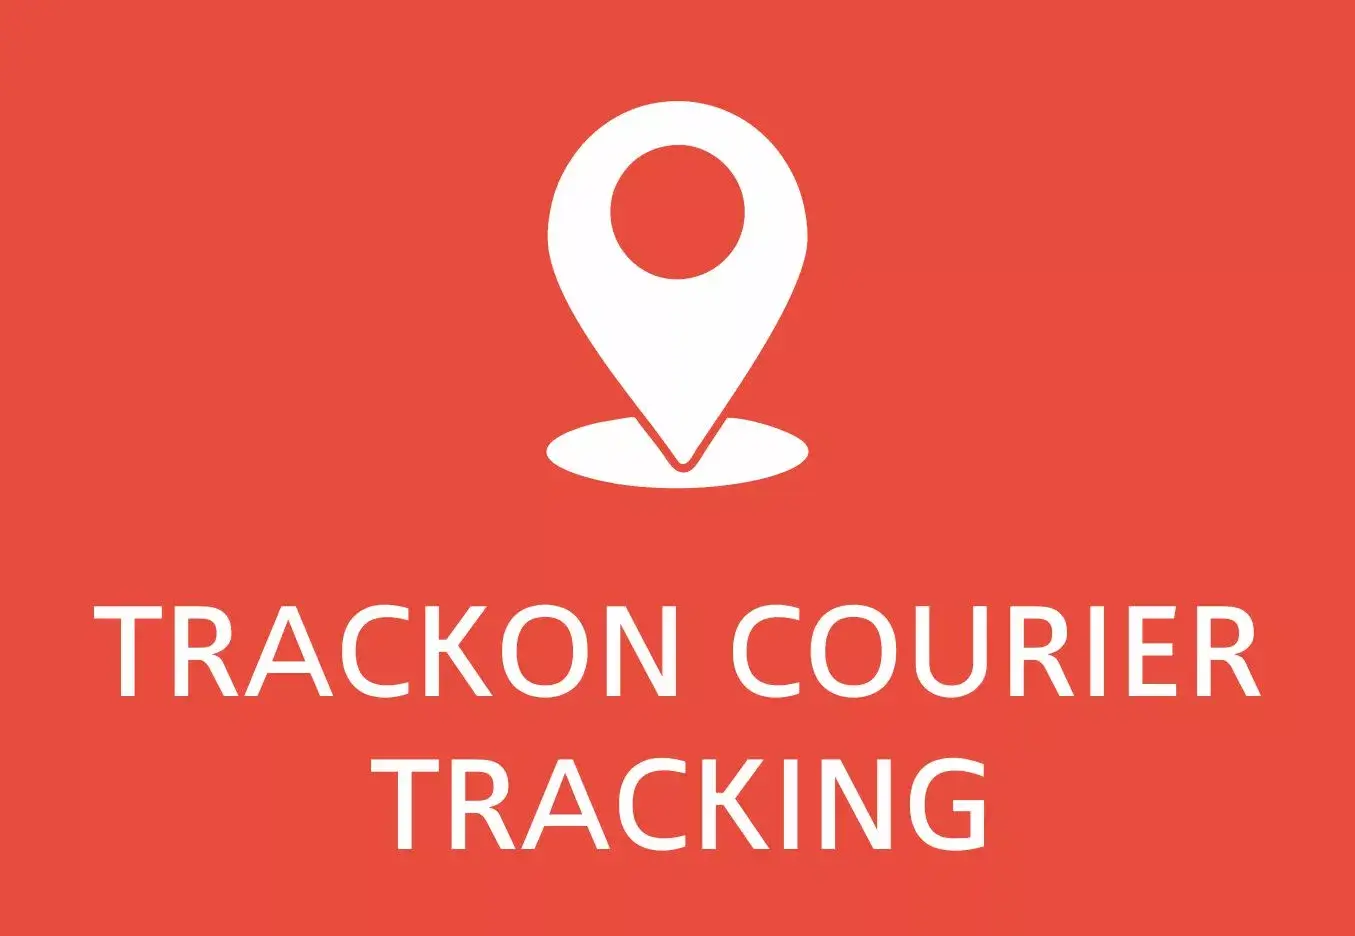 rackon courier tracking